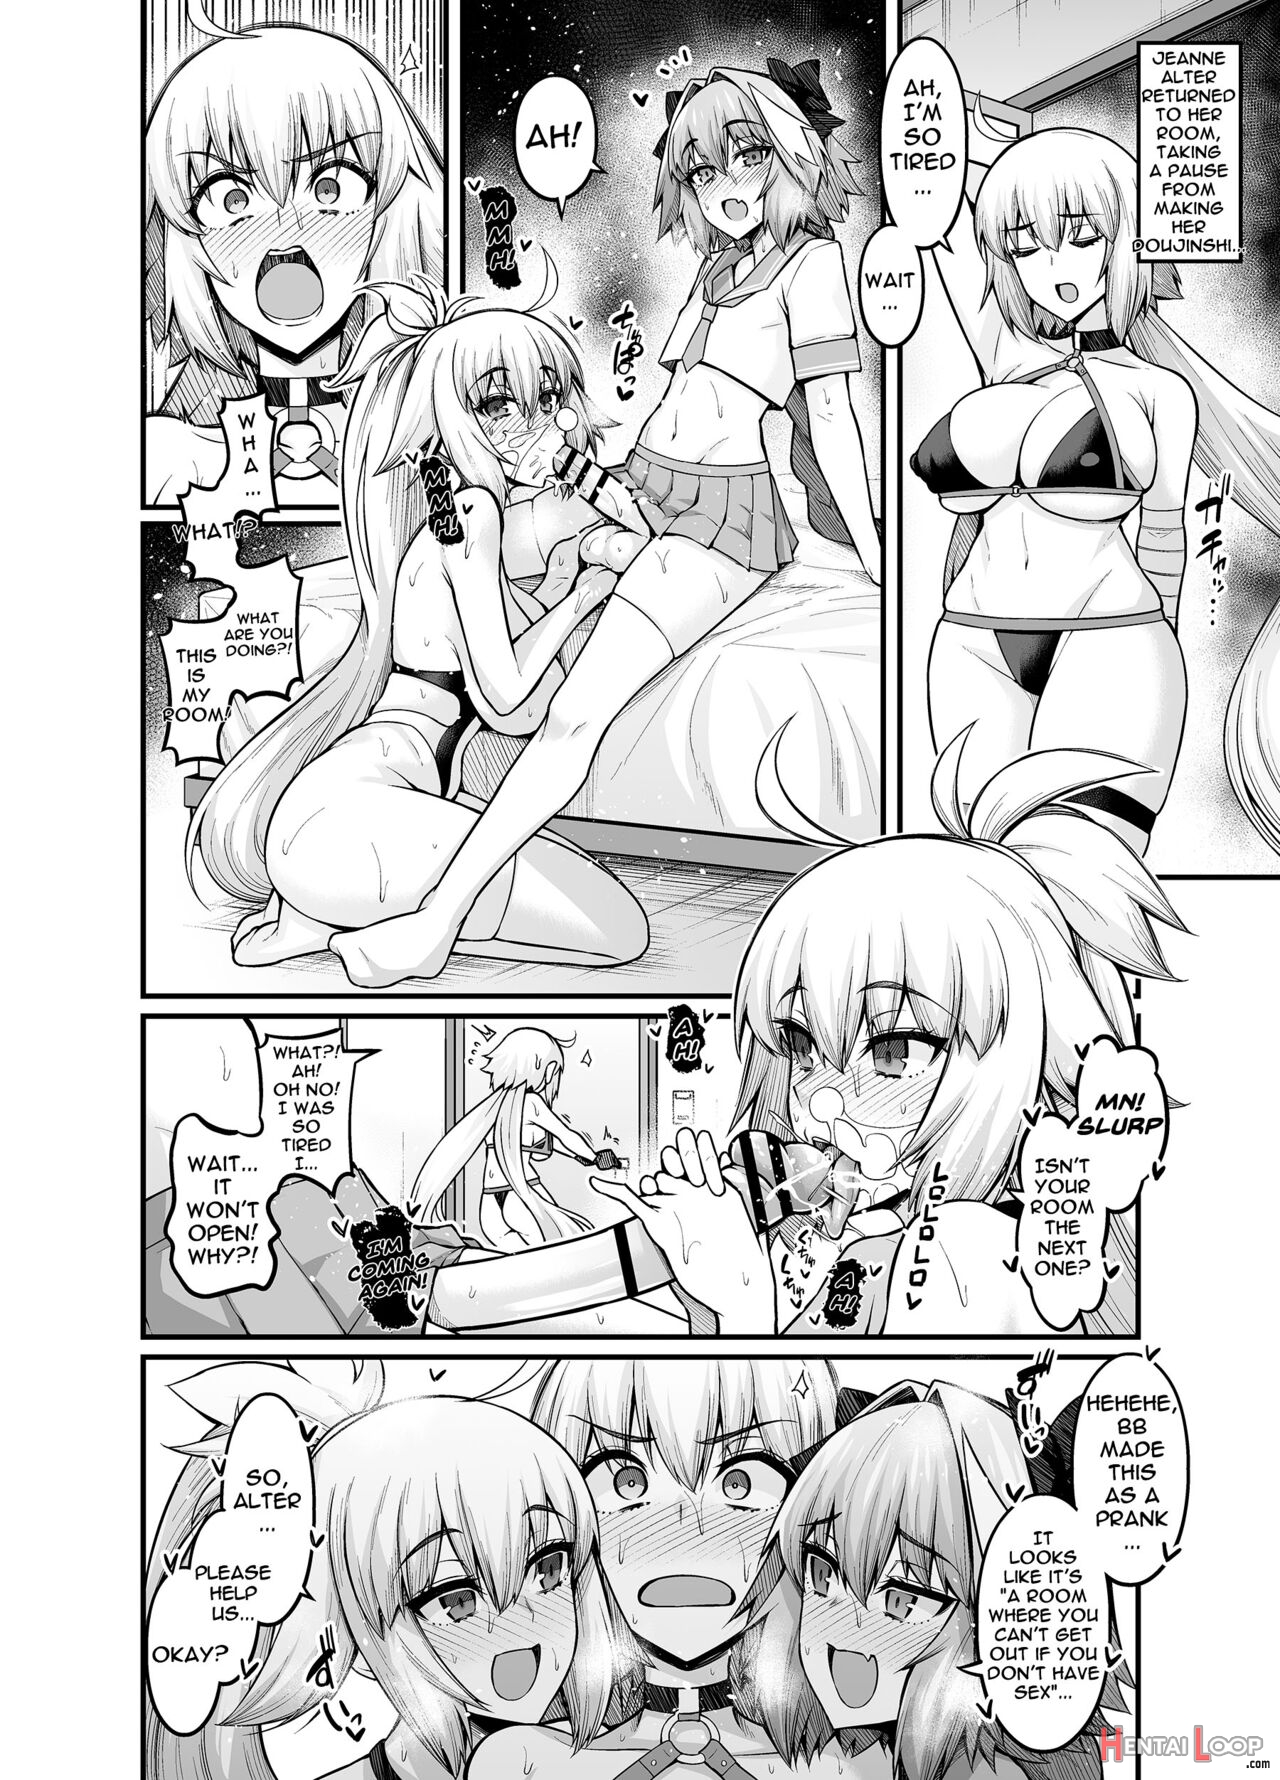 Together With Jeanne Alter In A Room Where If You Don't Have Sex You Can't Leave page 2